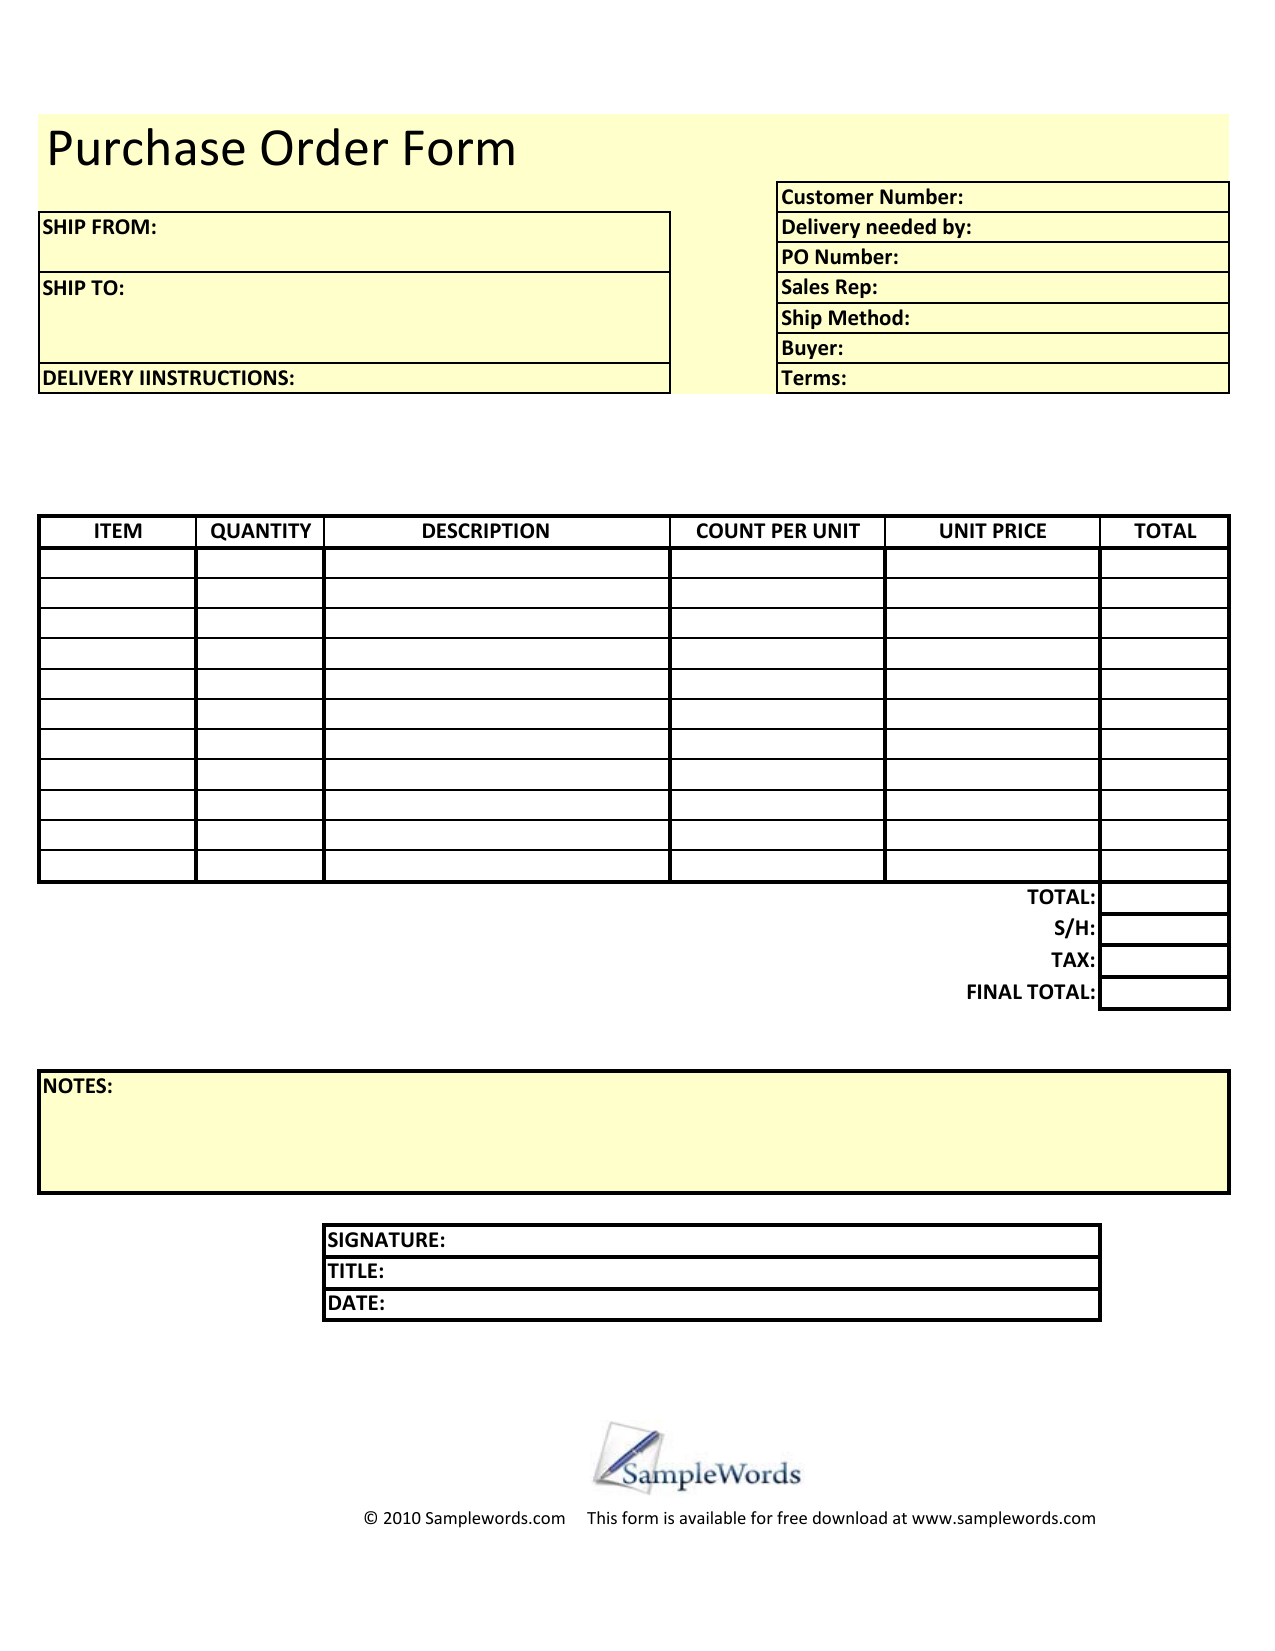 Download Blank Purchase Order Form Template | Excel | PDF | RTF | Word